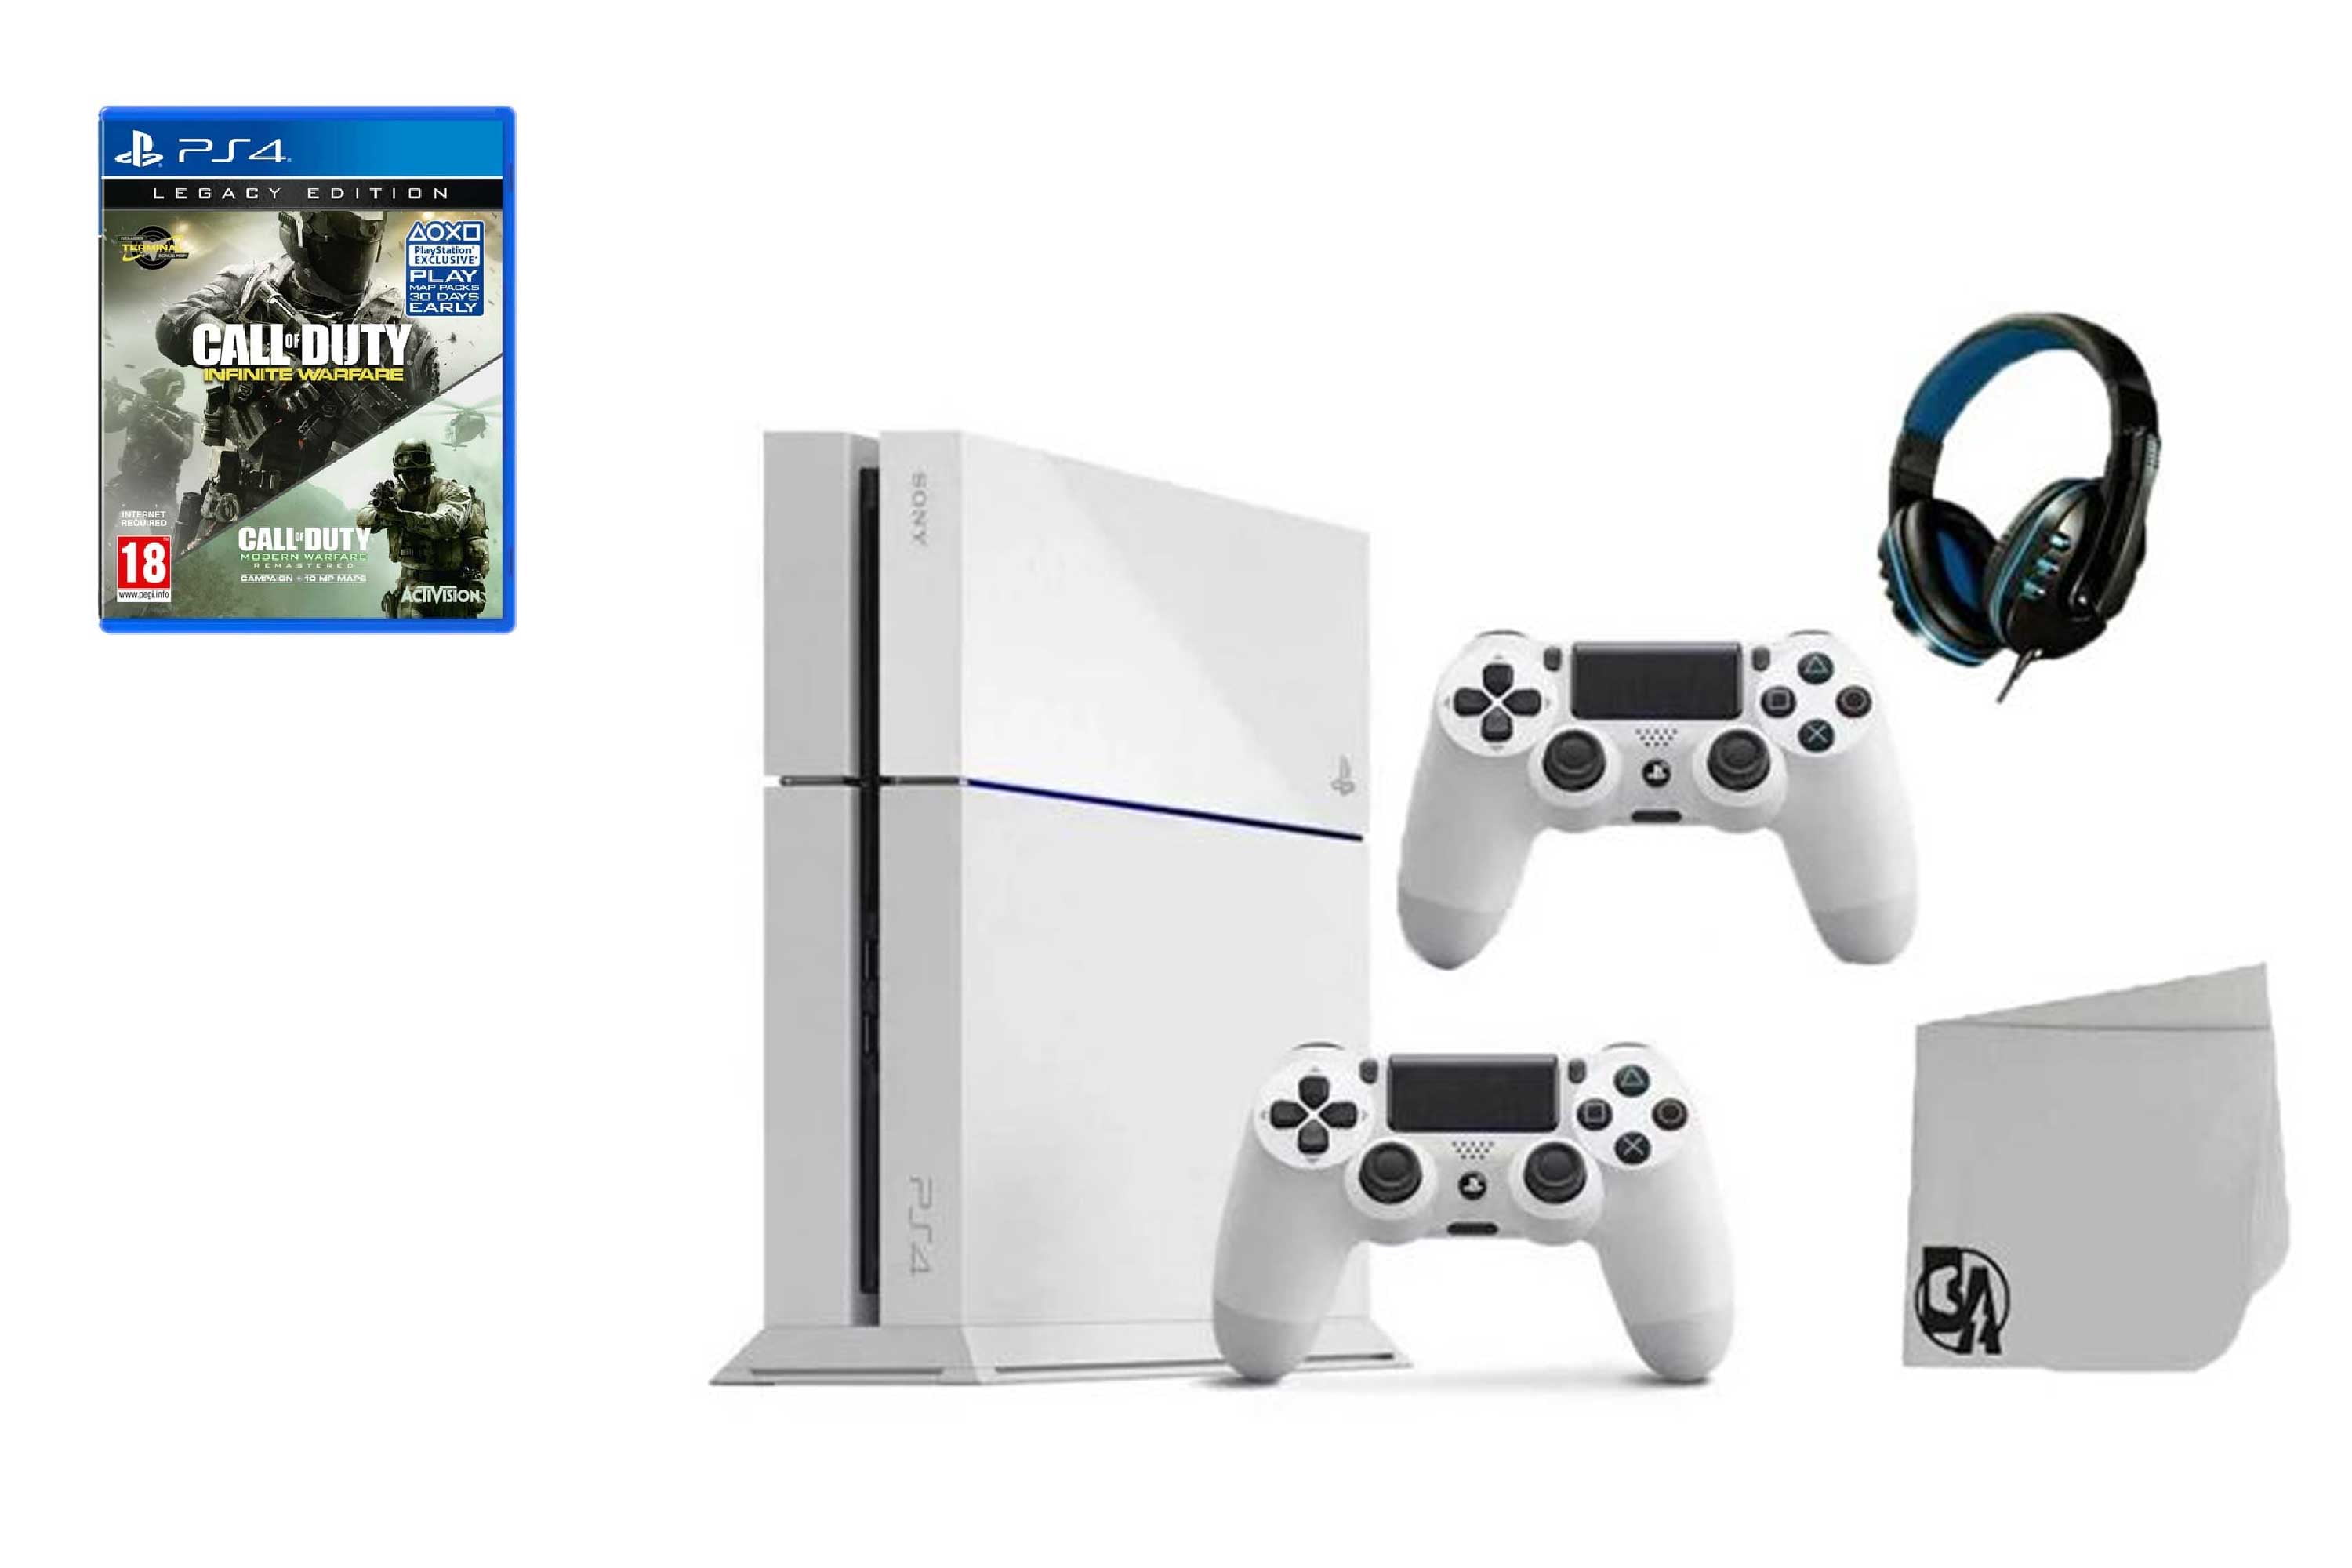 Sony PlayStation 4 PRO Glacier 1TB Gaming Console White with Call of Duty  Infinite Warfare BOLT AXTION Bundle Used